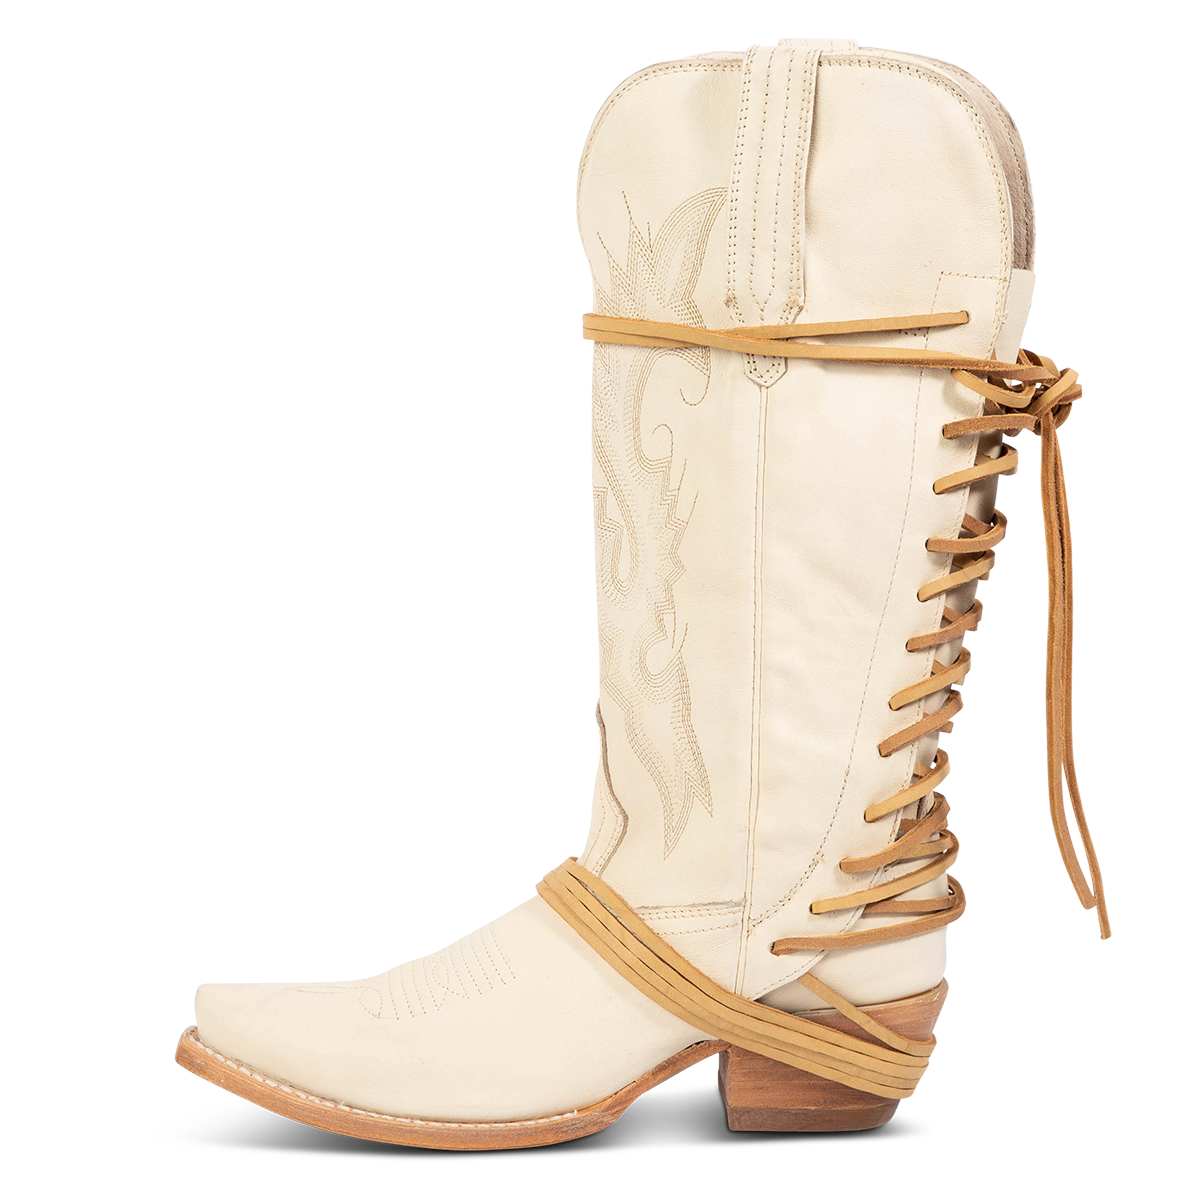 Side view showing pull straps and back lace panel on FREEBIRD women's Wardon beige leather cowboy boot